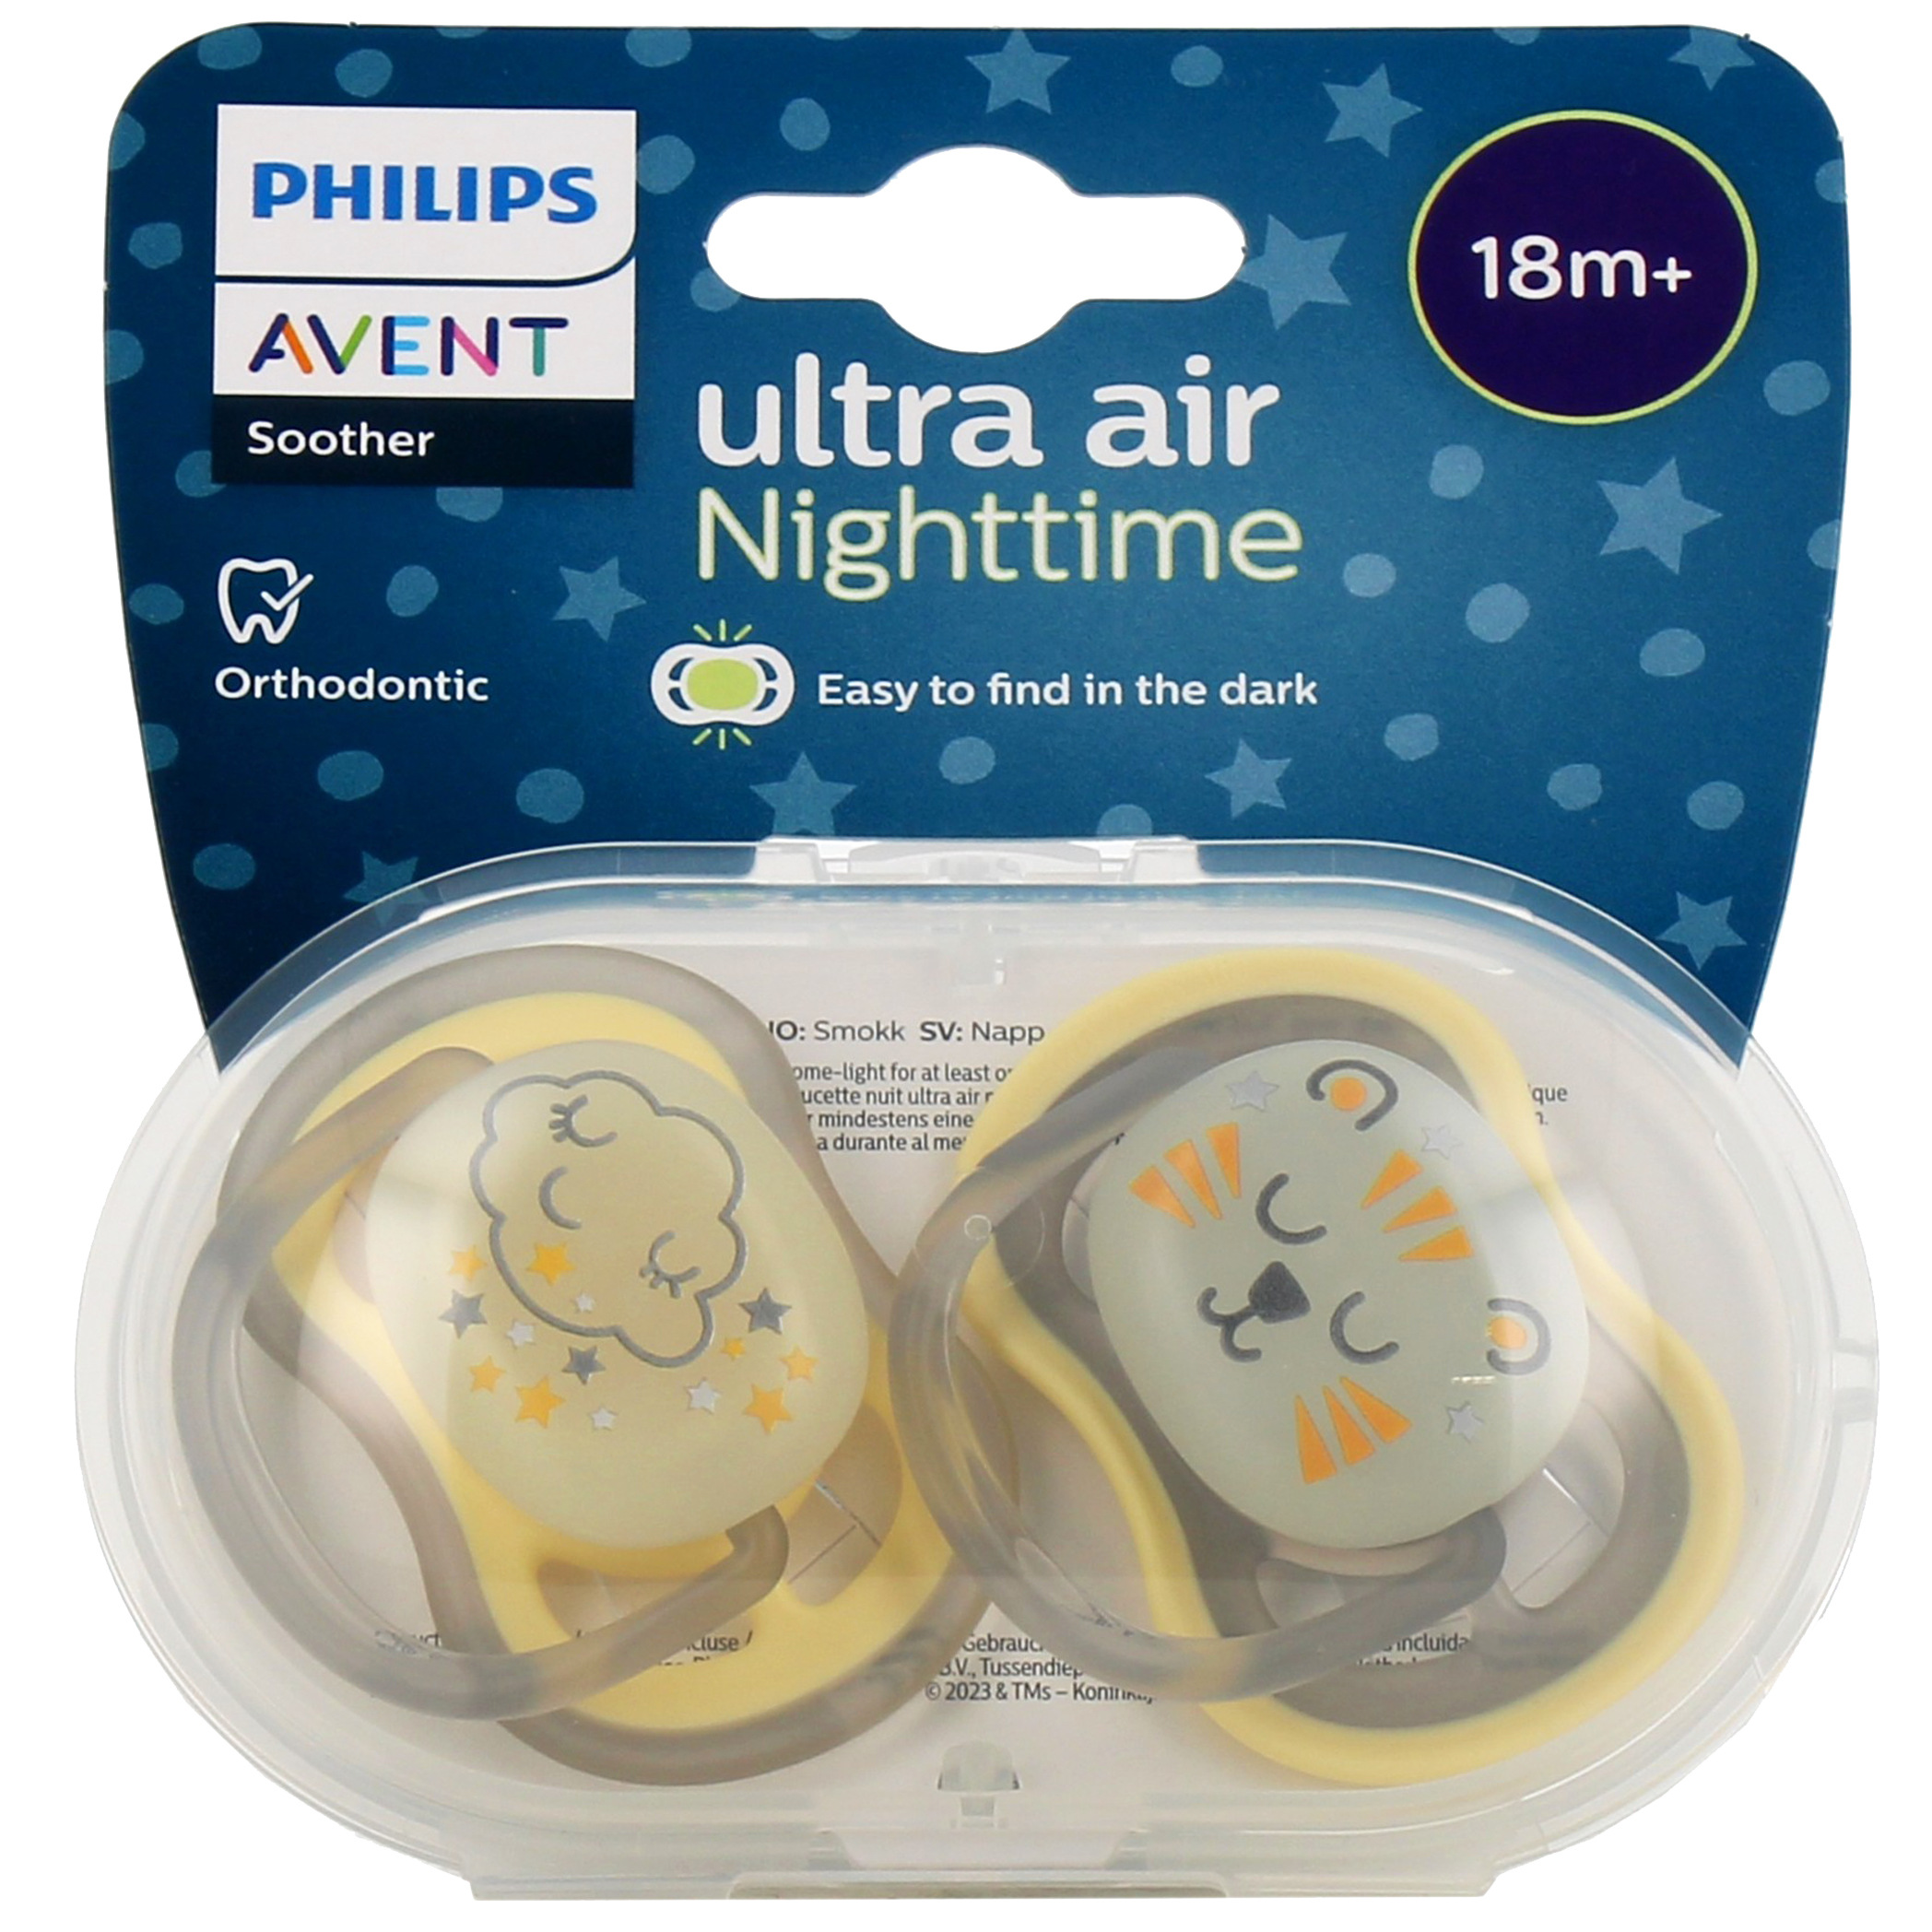 PHILIPS AVENT - Ultra Air - Fée ou Licorne